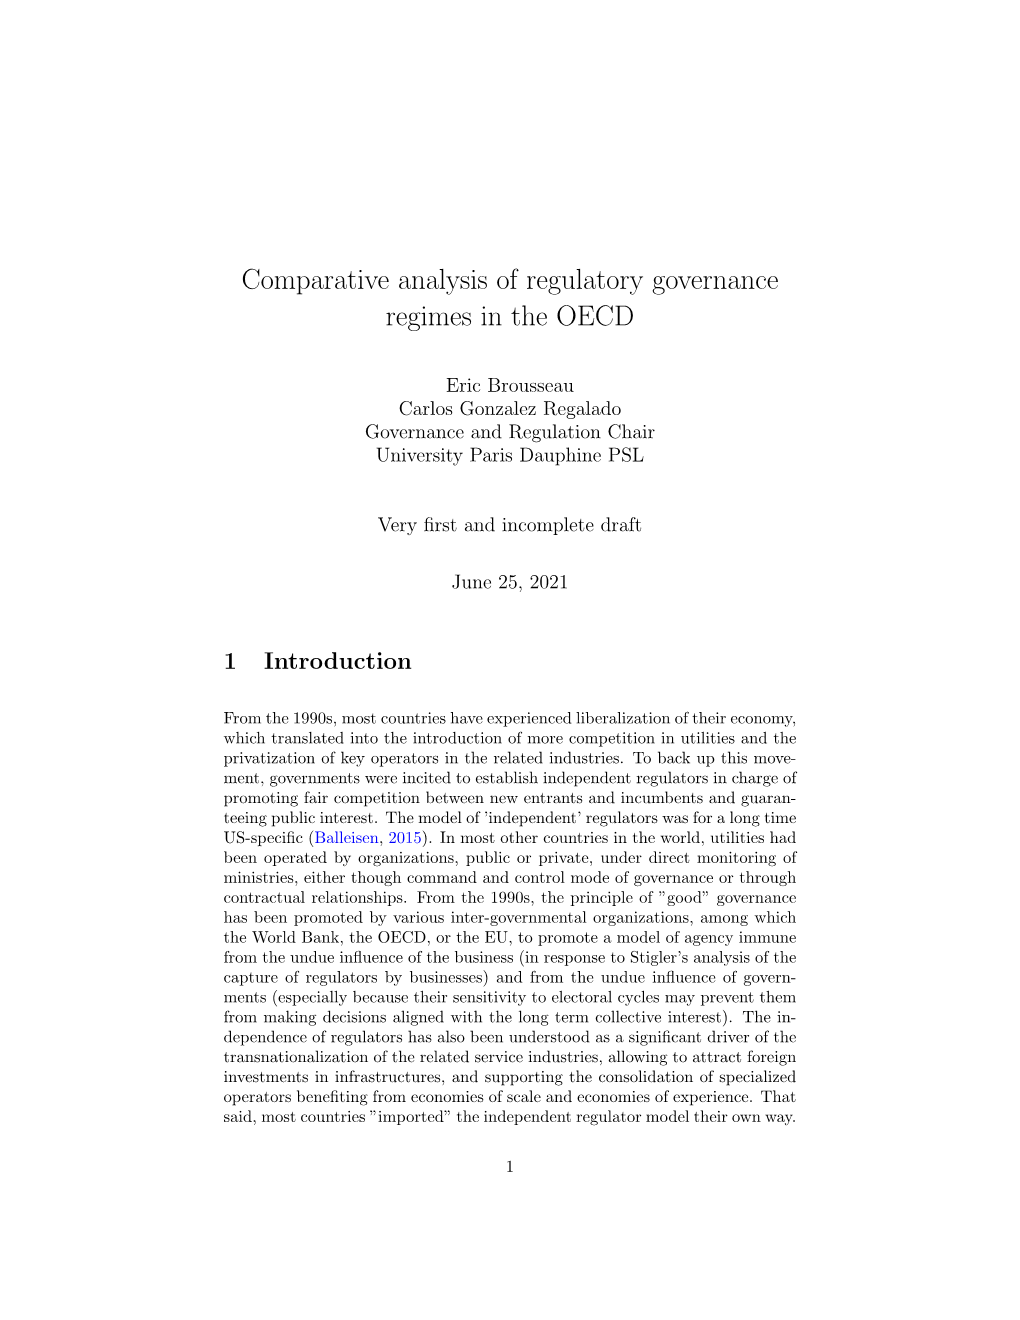 Comparative Analysis of Regulatory Governance Regimes in the OECD